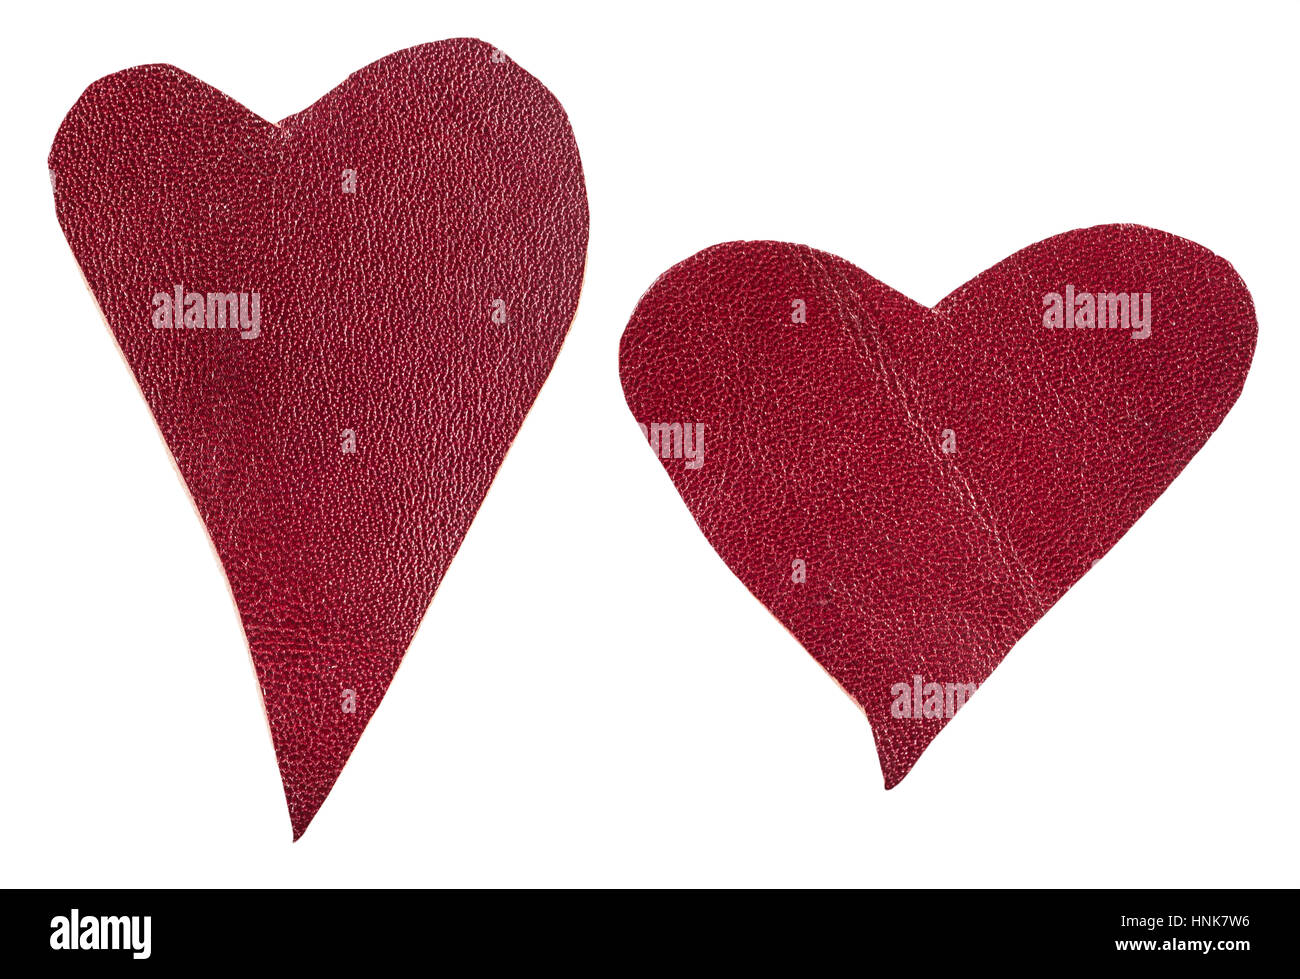 pair of red leather hearts isolated on white background Stock Photo